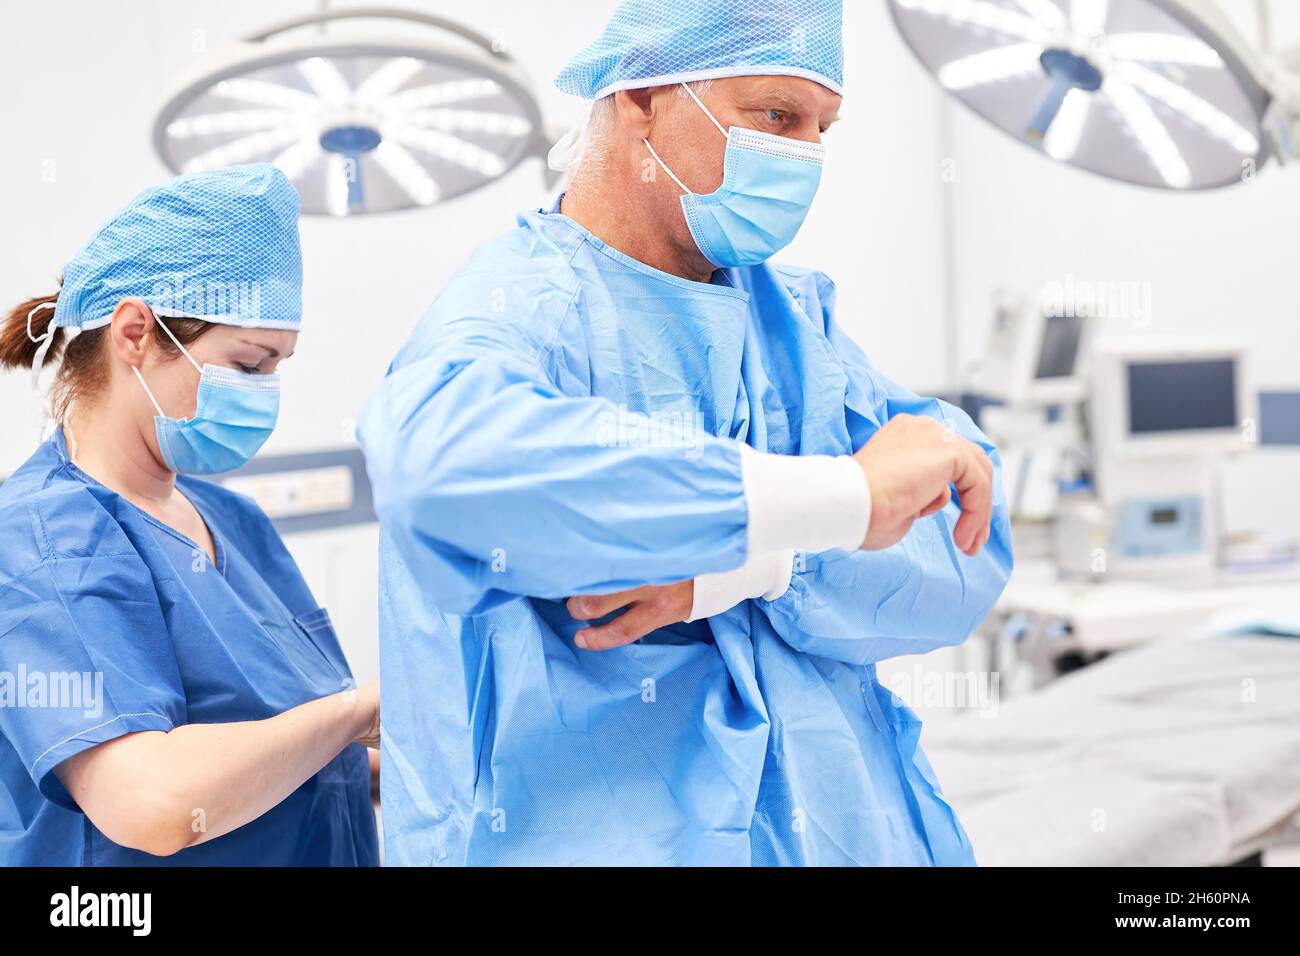 Resident doctor helps surgeon put on gown before surgery Stock Photo